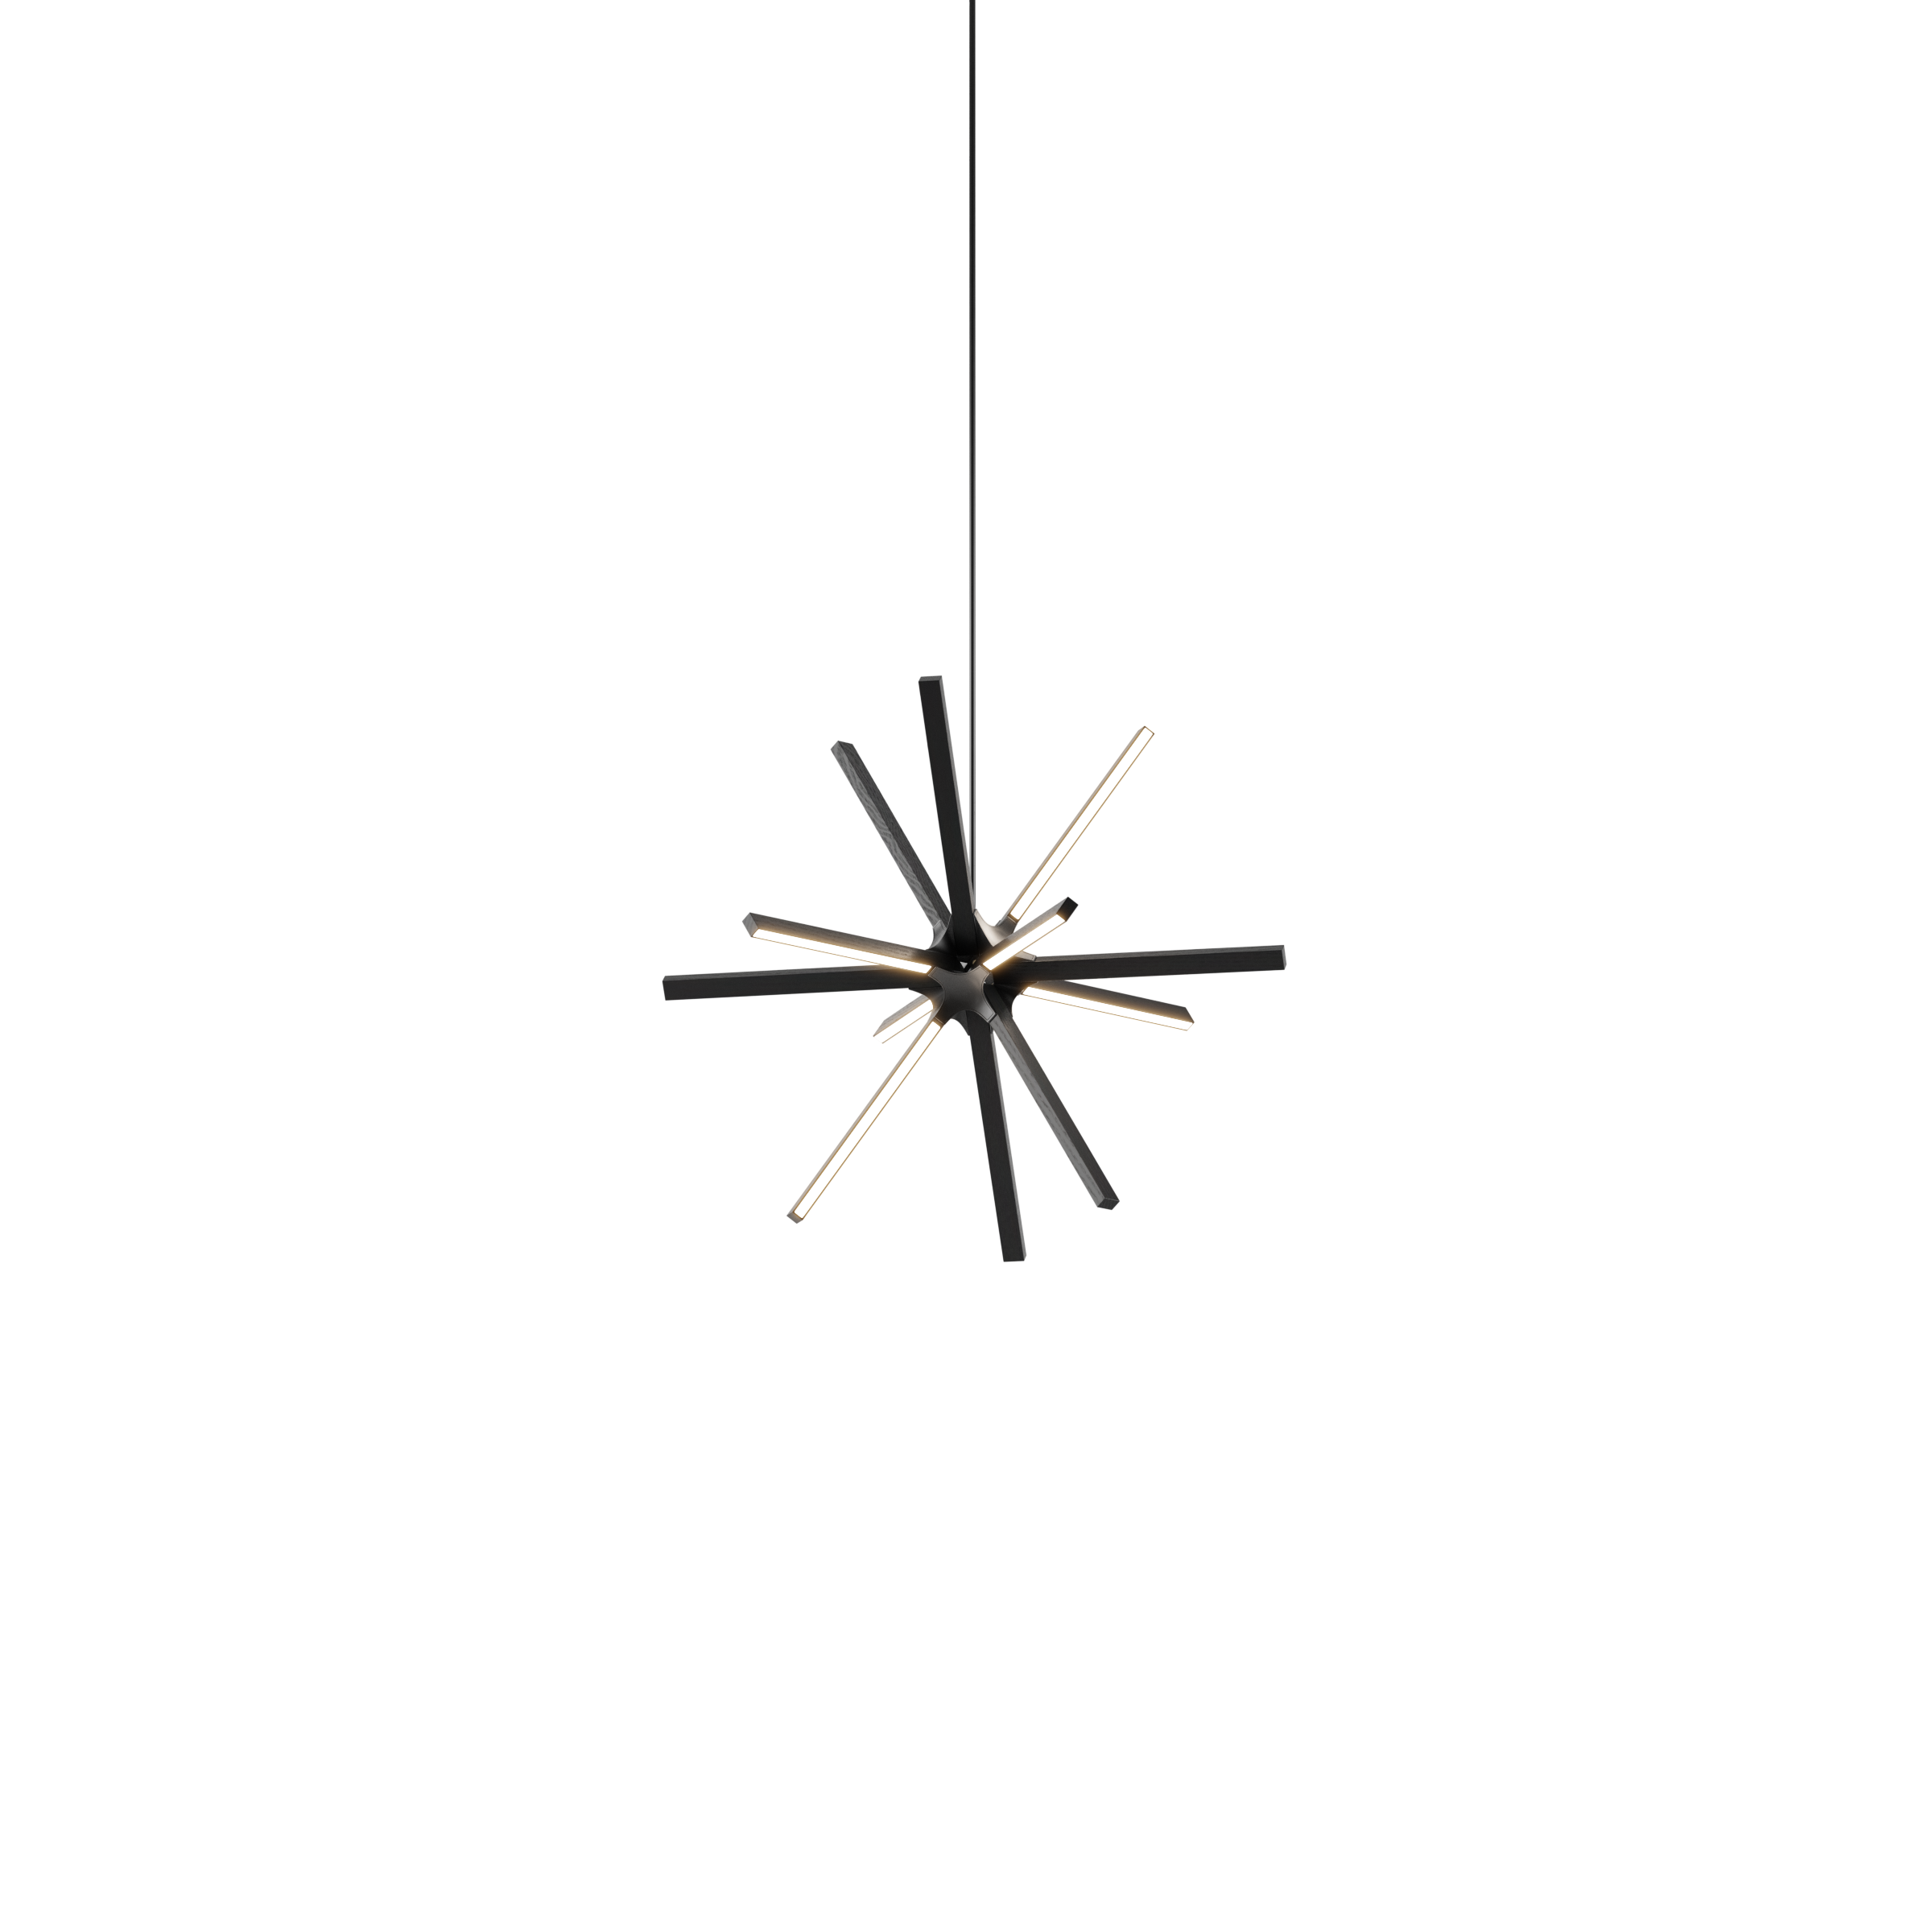 Image of a Stickbulb Boom lighting fixture. The modern fixture consists of sleek wooden beams with multiple integrated LED bulbs.